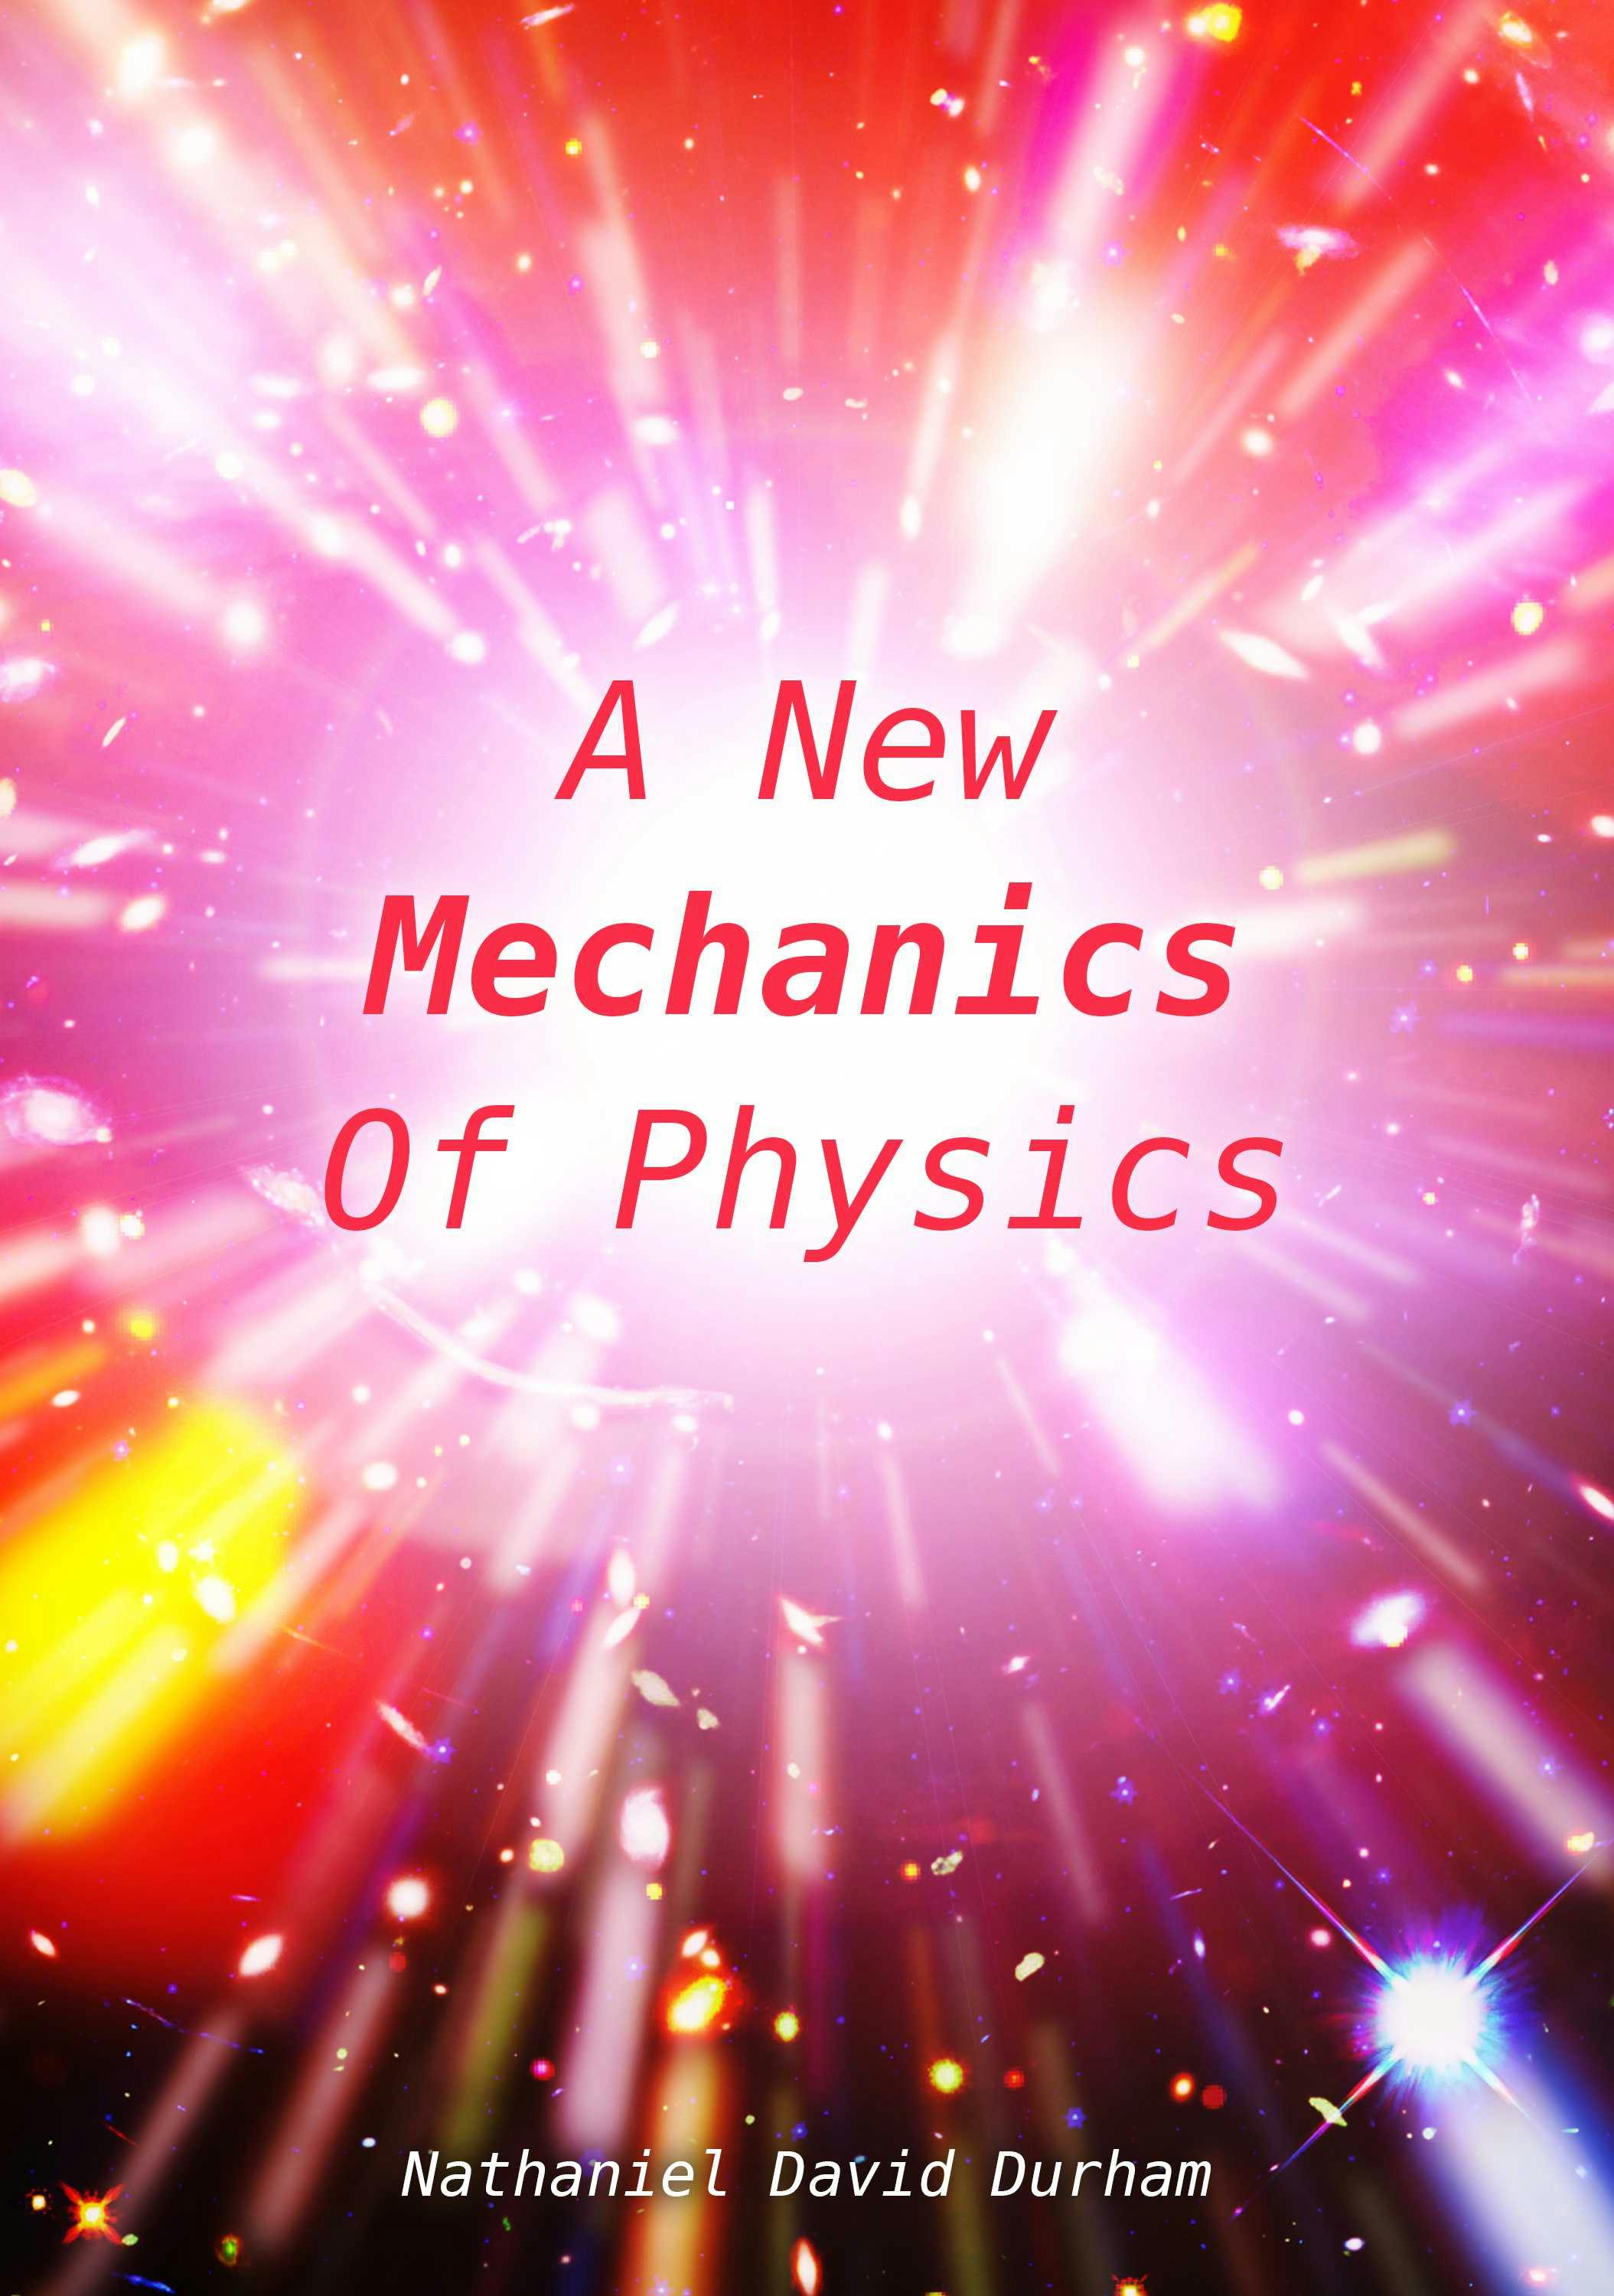 A New Mechanics Of Physics: A unification of the physics of the universe - Nathaniel David Durham